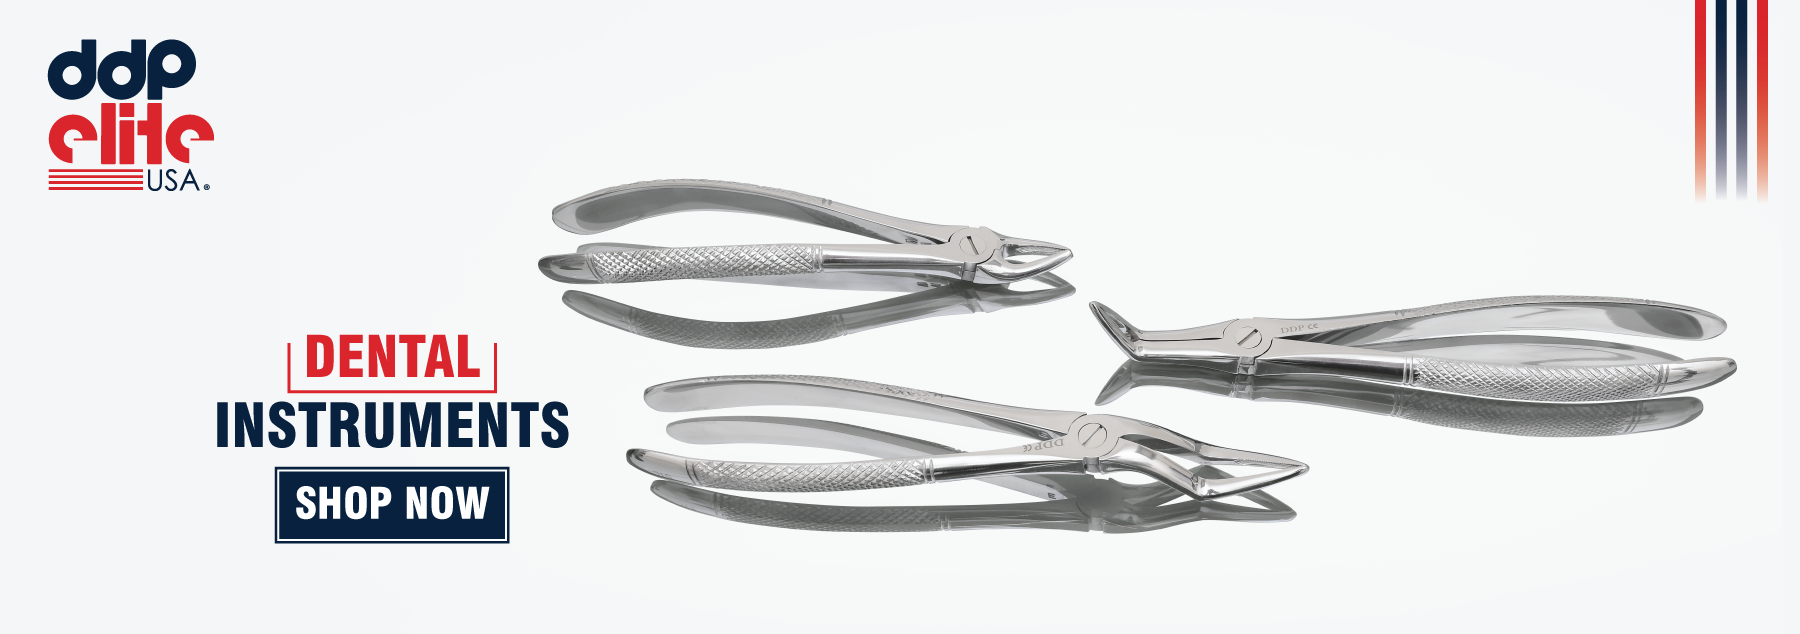 dental_instruments_extraction_forceps_pliers